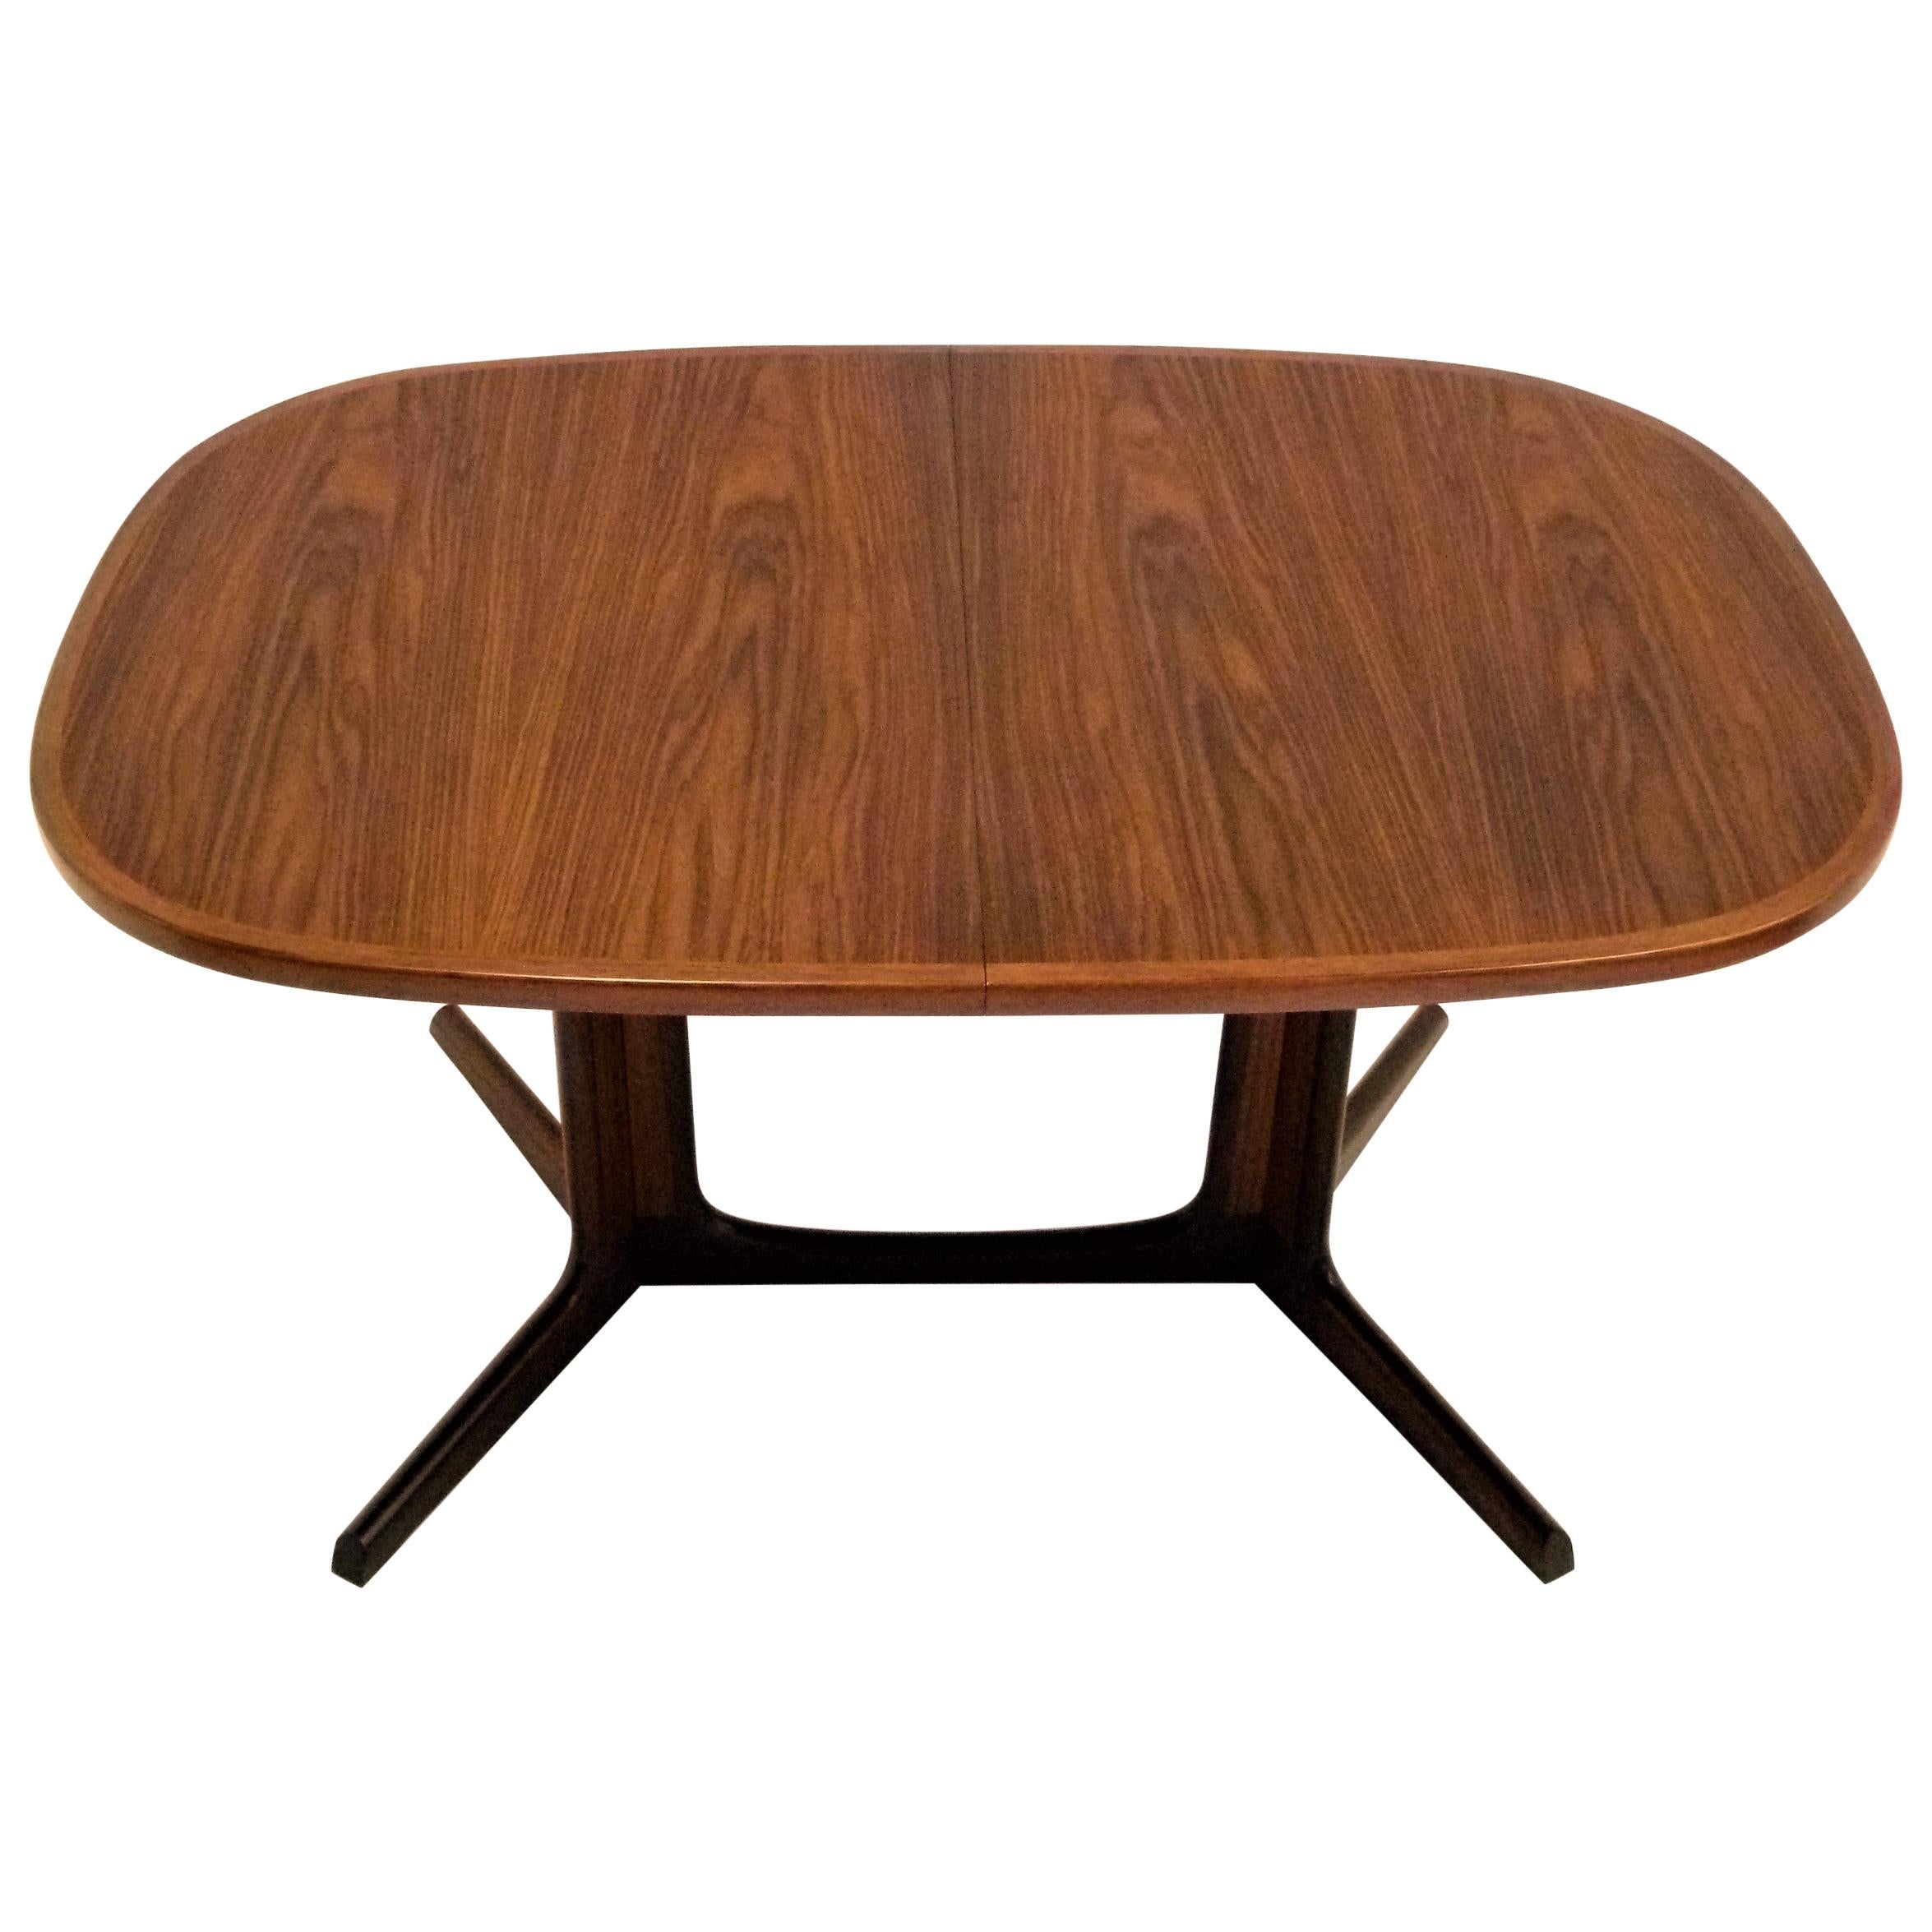 1960s Danish Rosewood Dining Table by Gudme Møbelfabrik